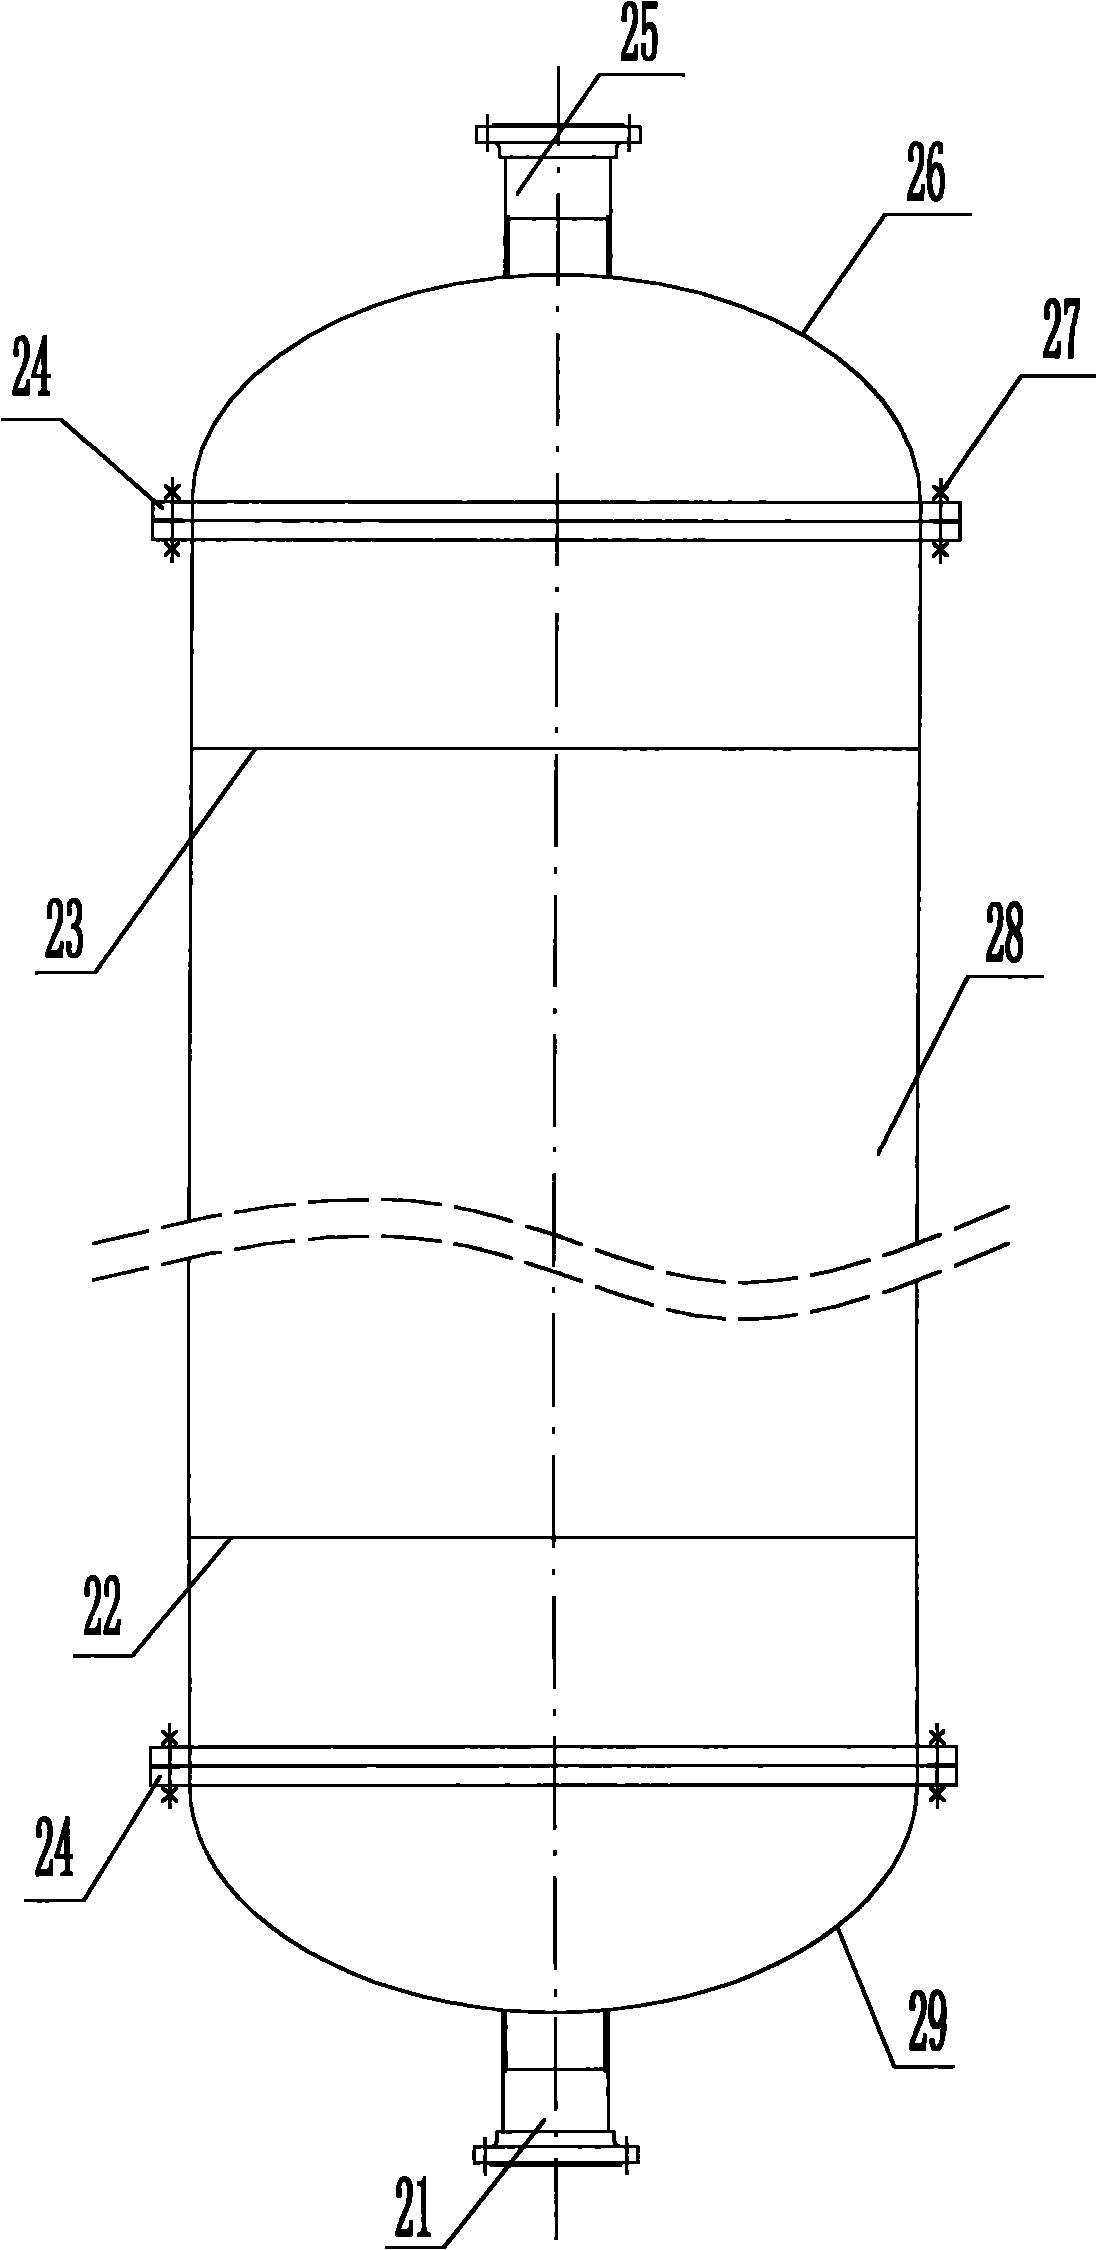 Method and device for refining chlorine hydride byproduct and recovering trifluoromethane in production of monochlorodifluoromethane